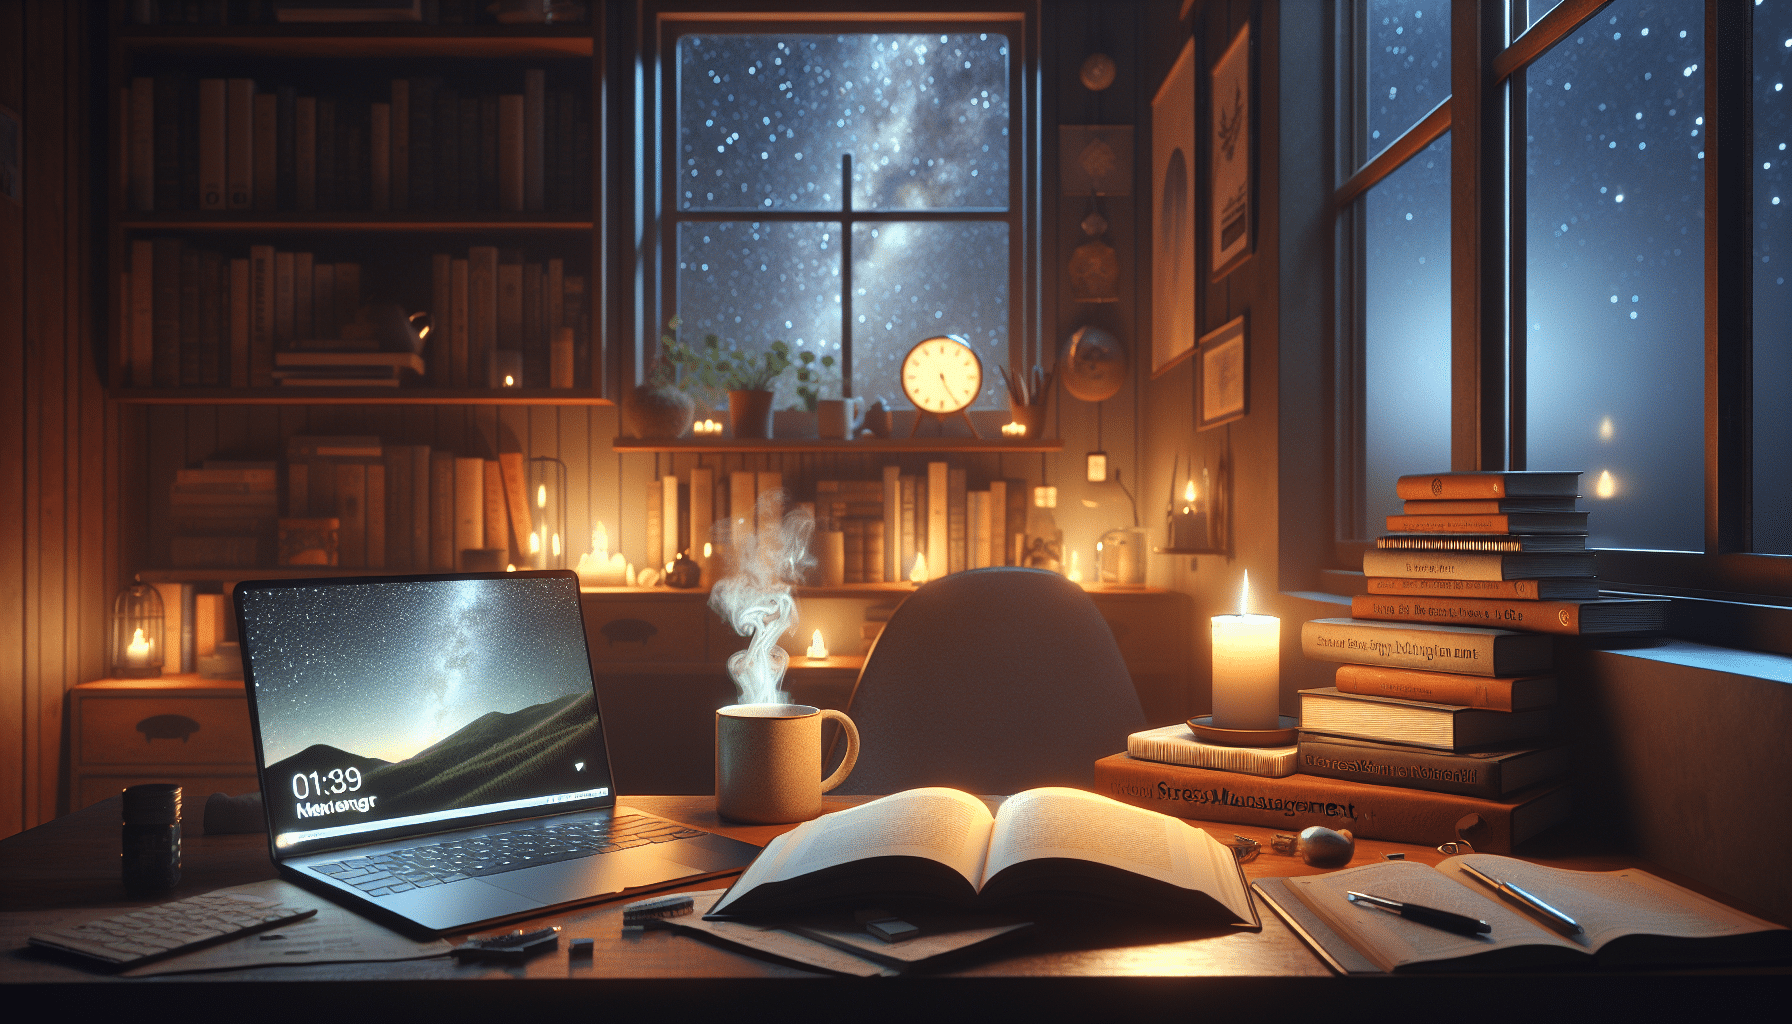 Cozy night study with stress relief essentials